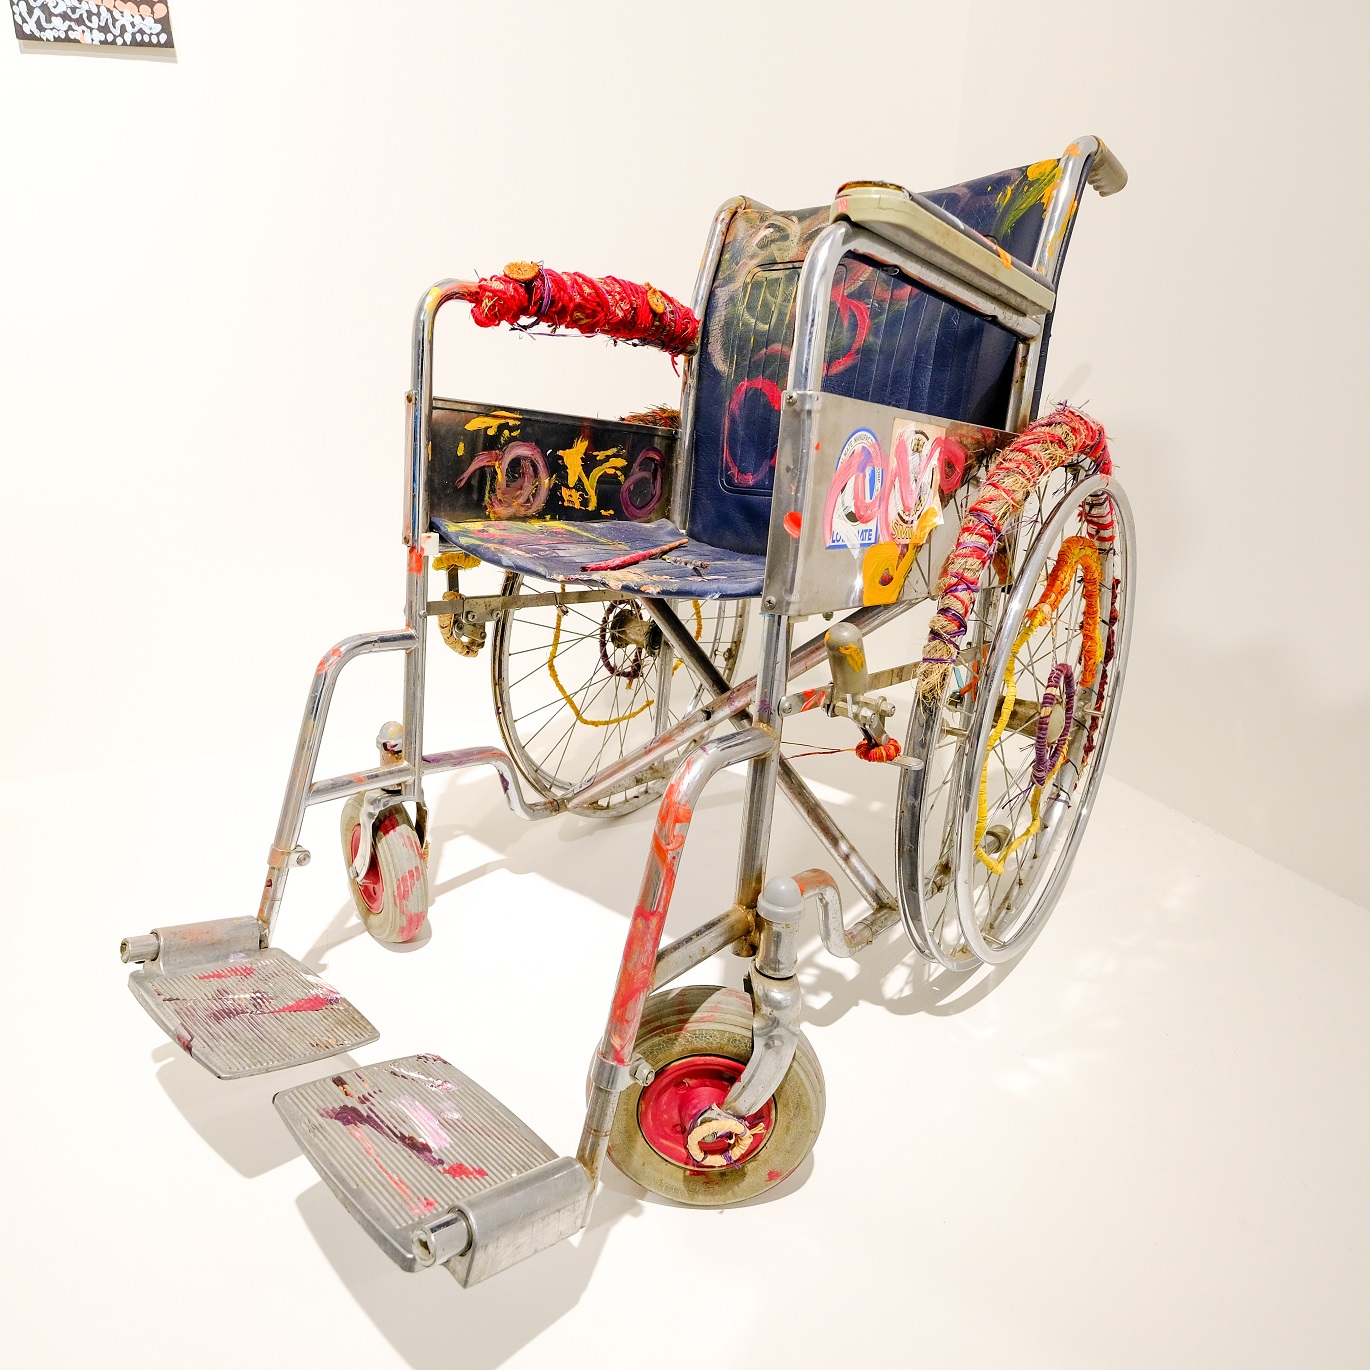 The wheelchair from 'The wobblies' section of the Songlines exhibition at The Box